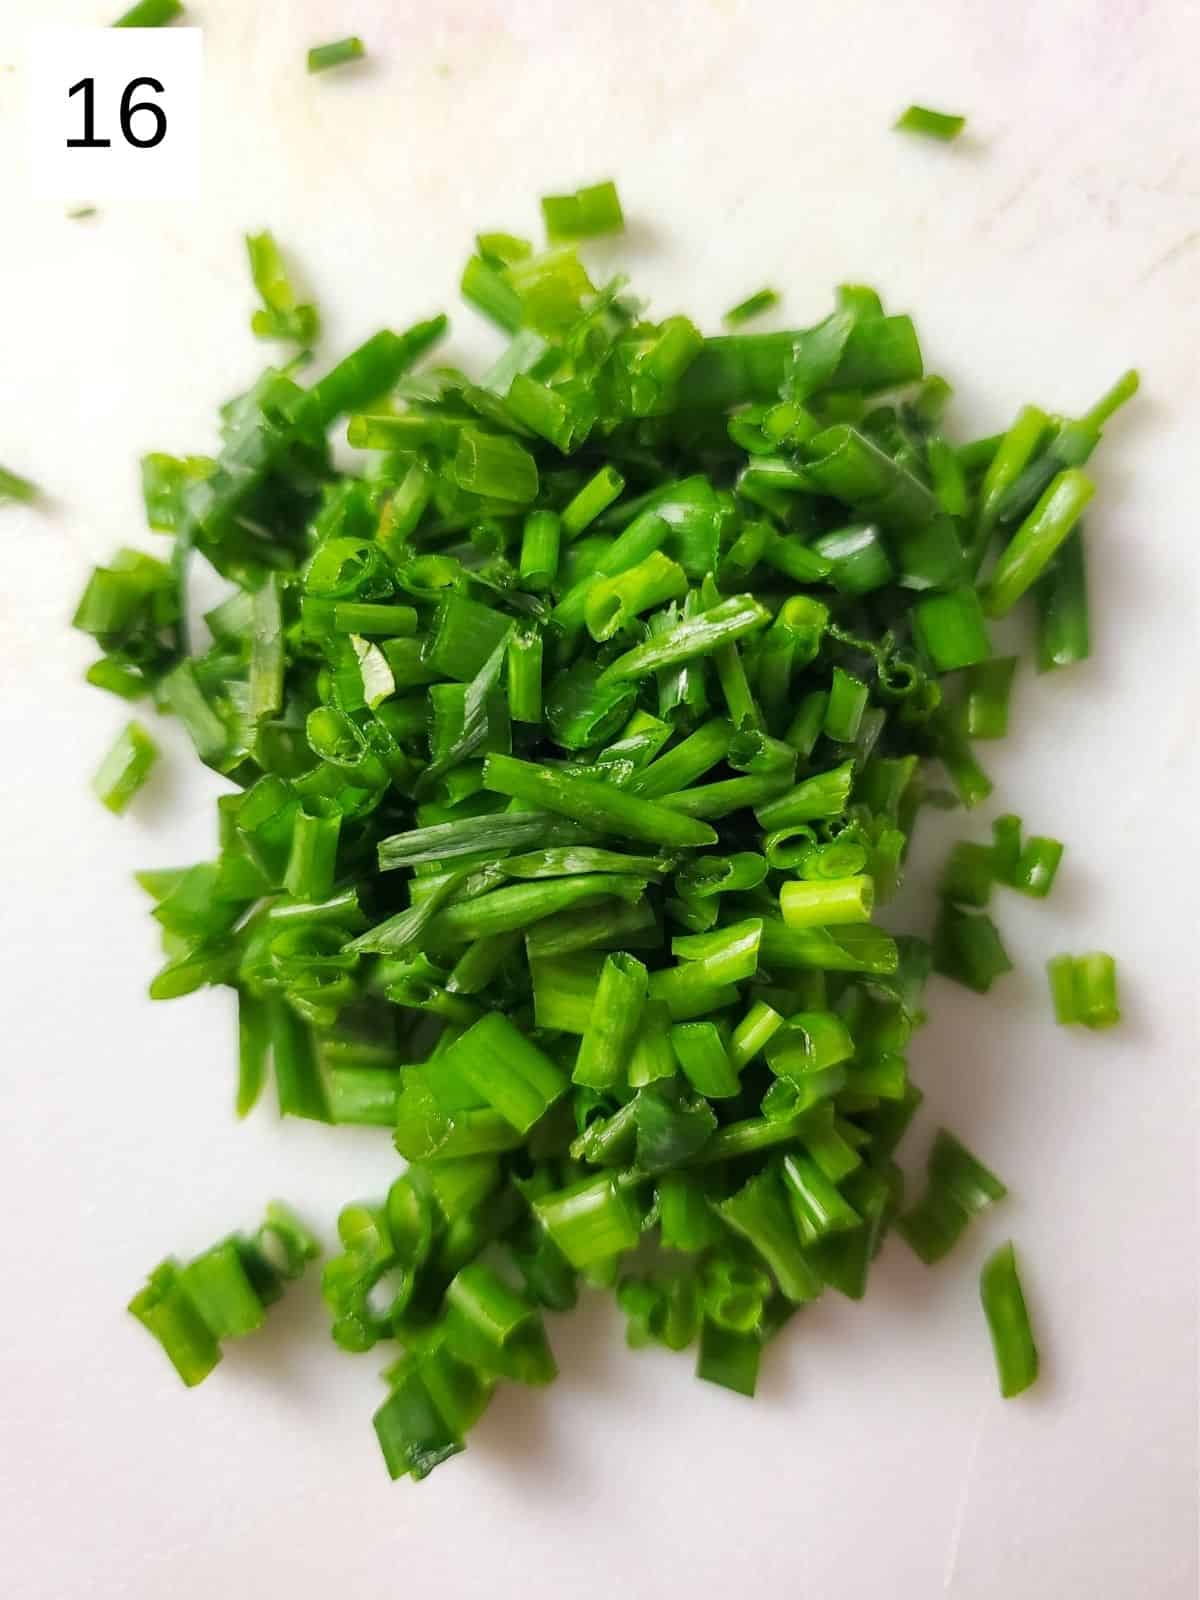 sliced chives on a white chopping board.